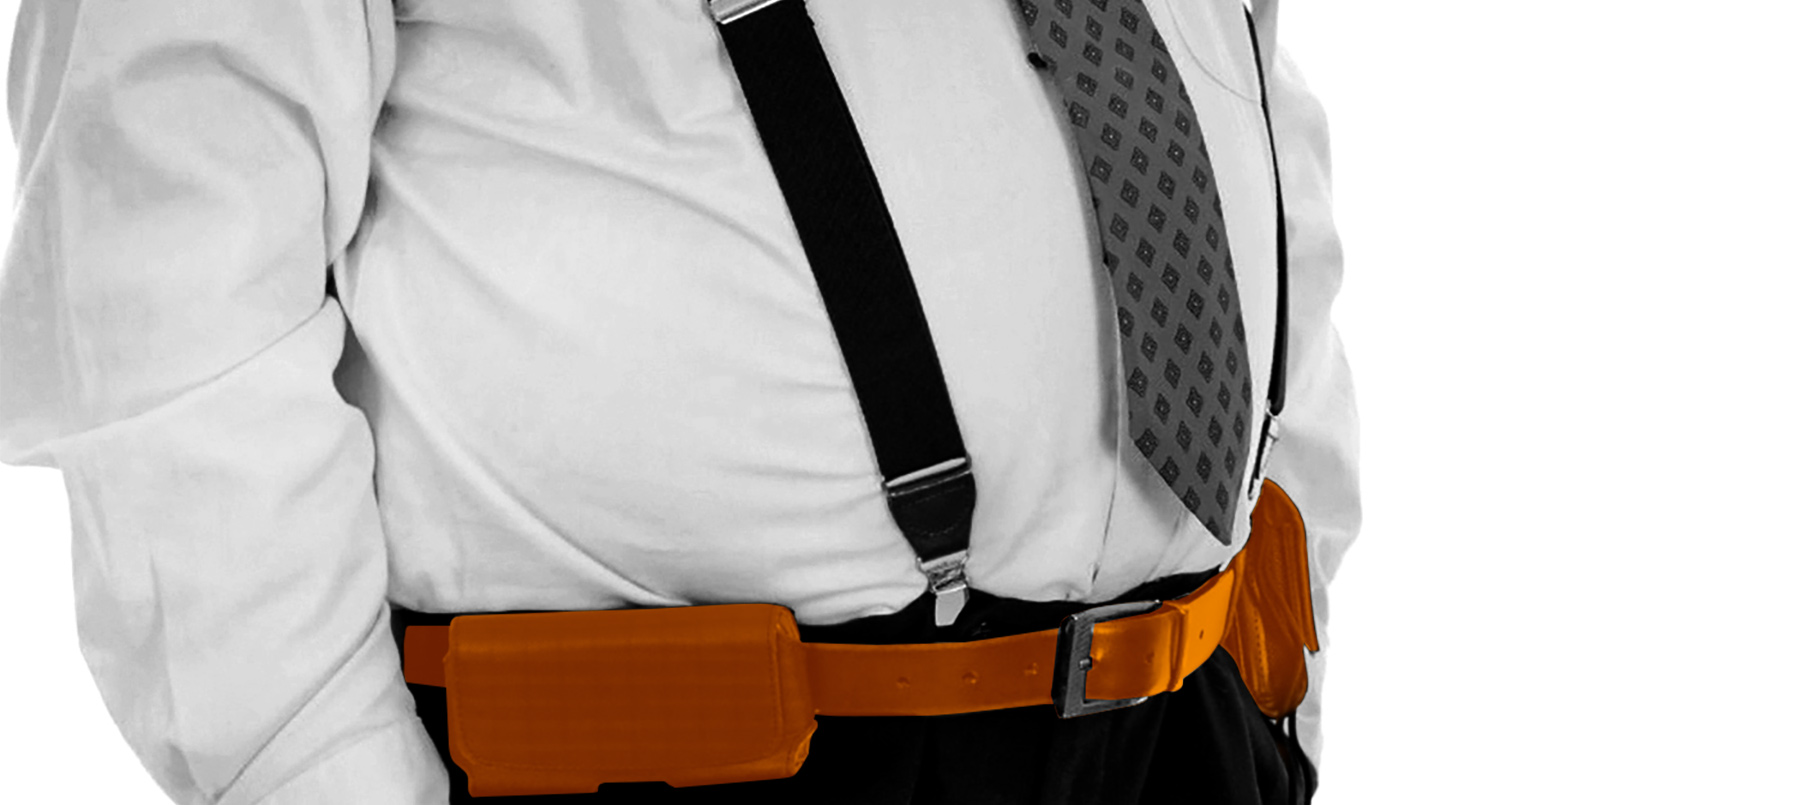 Machine Learning: A Belt and Suspenders Approach